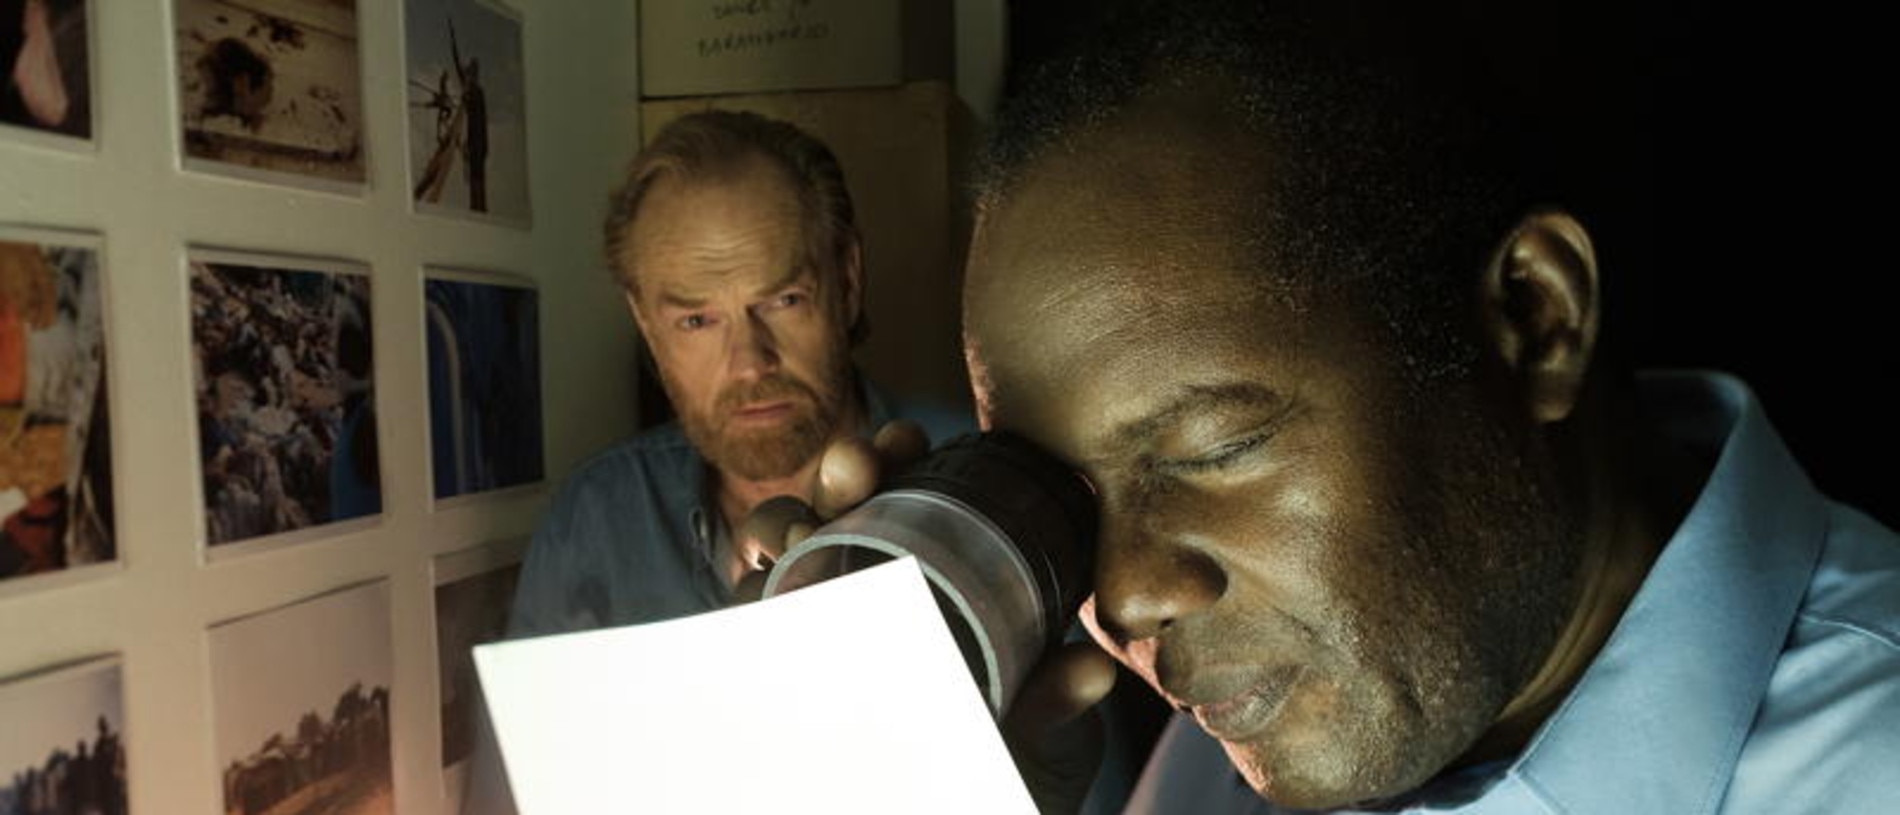 Still from aussie movie 'Proof' w. Hugo Weaving, Genevieve Picot and Russel  Crowe - a must see